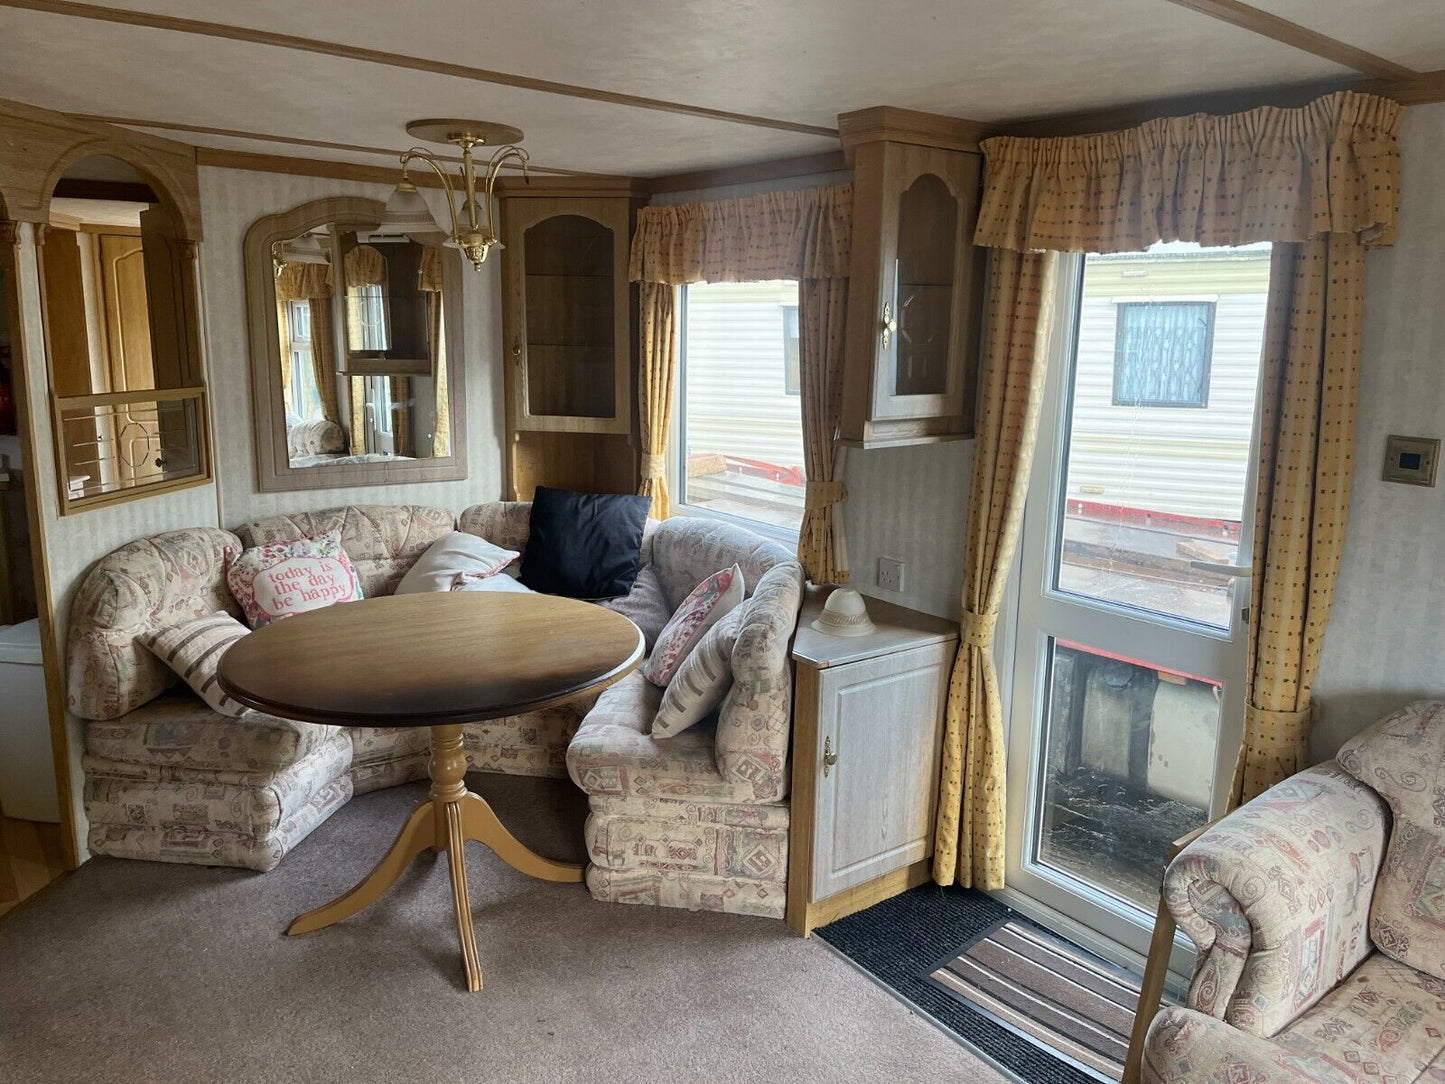 Bid on 2 BEDROOM STATIC CARAVAN 36 FOOT LONG X 12 FOOT WIDE- Buy &amp; Sell on Auction with EAMA Group